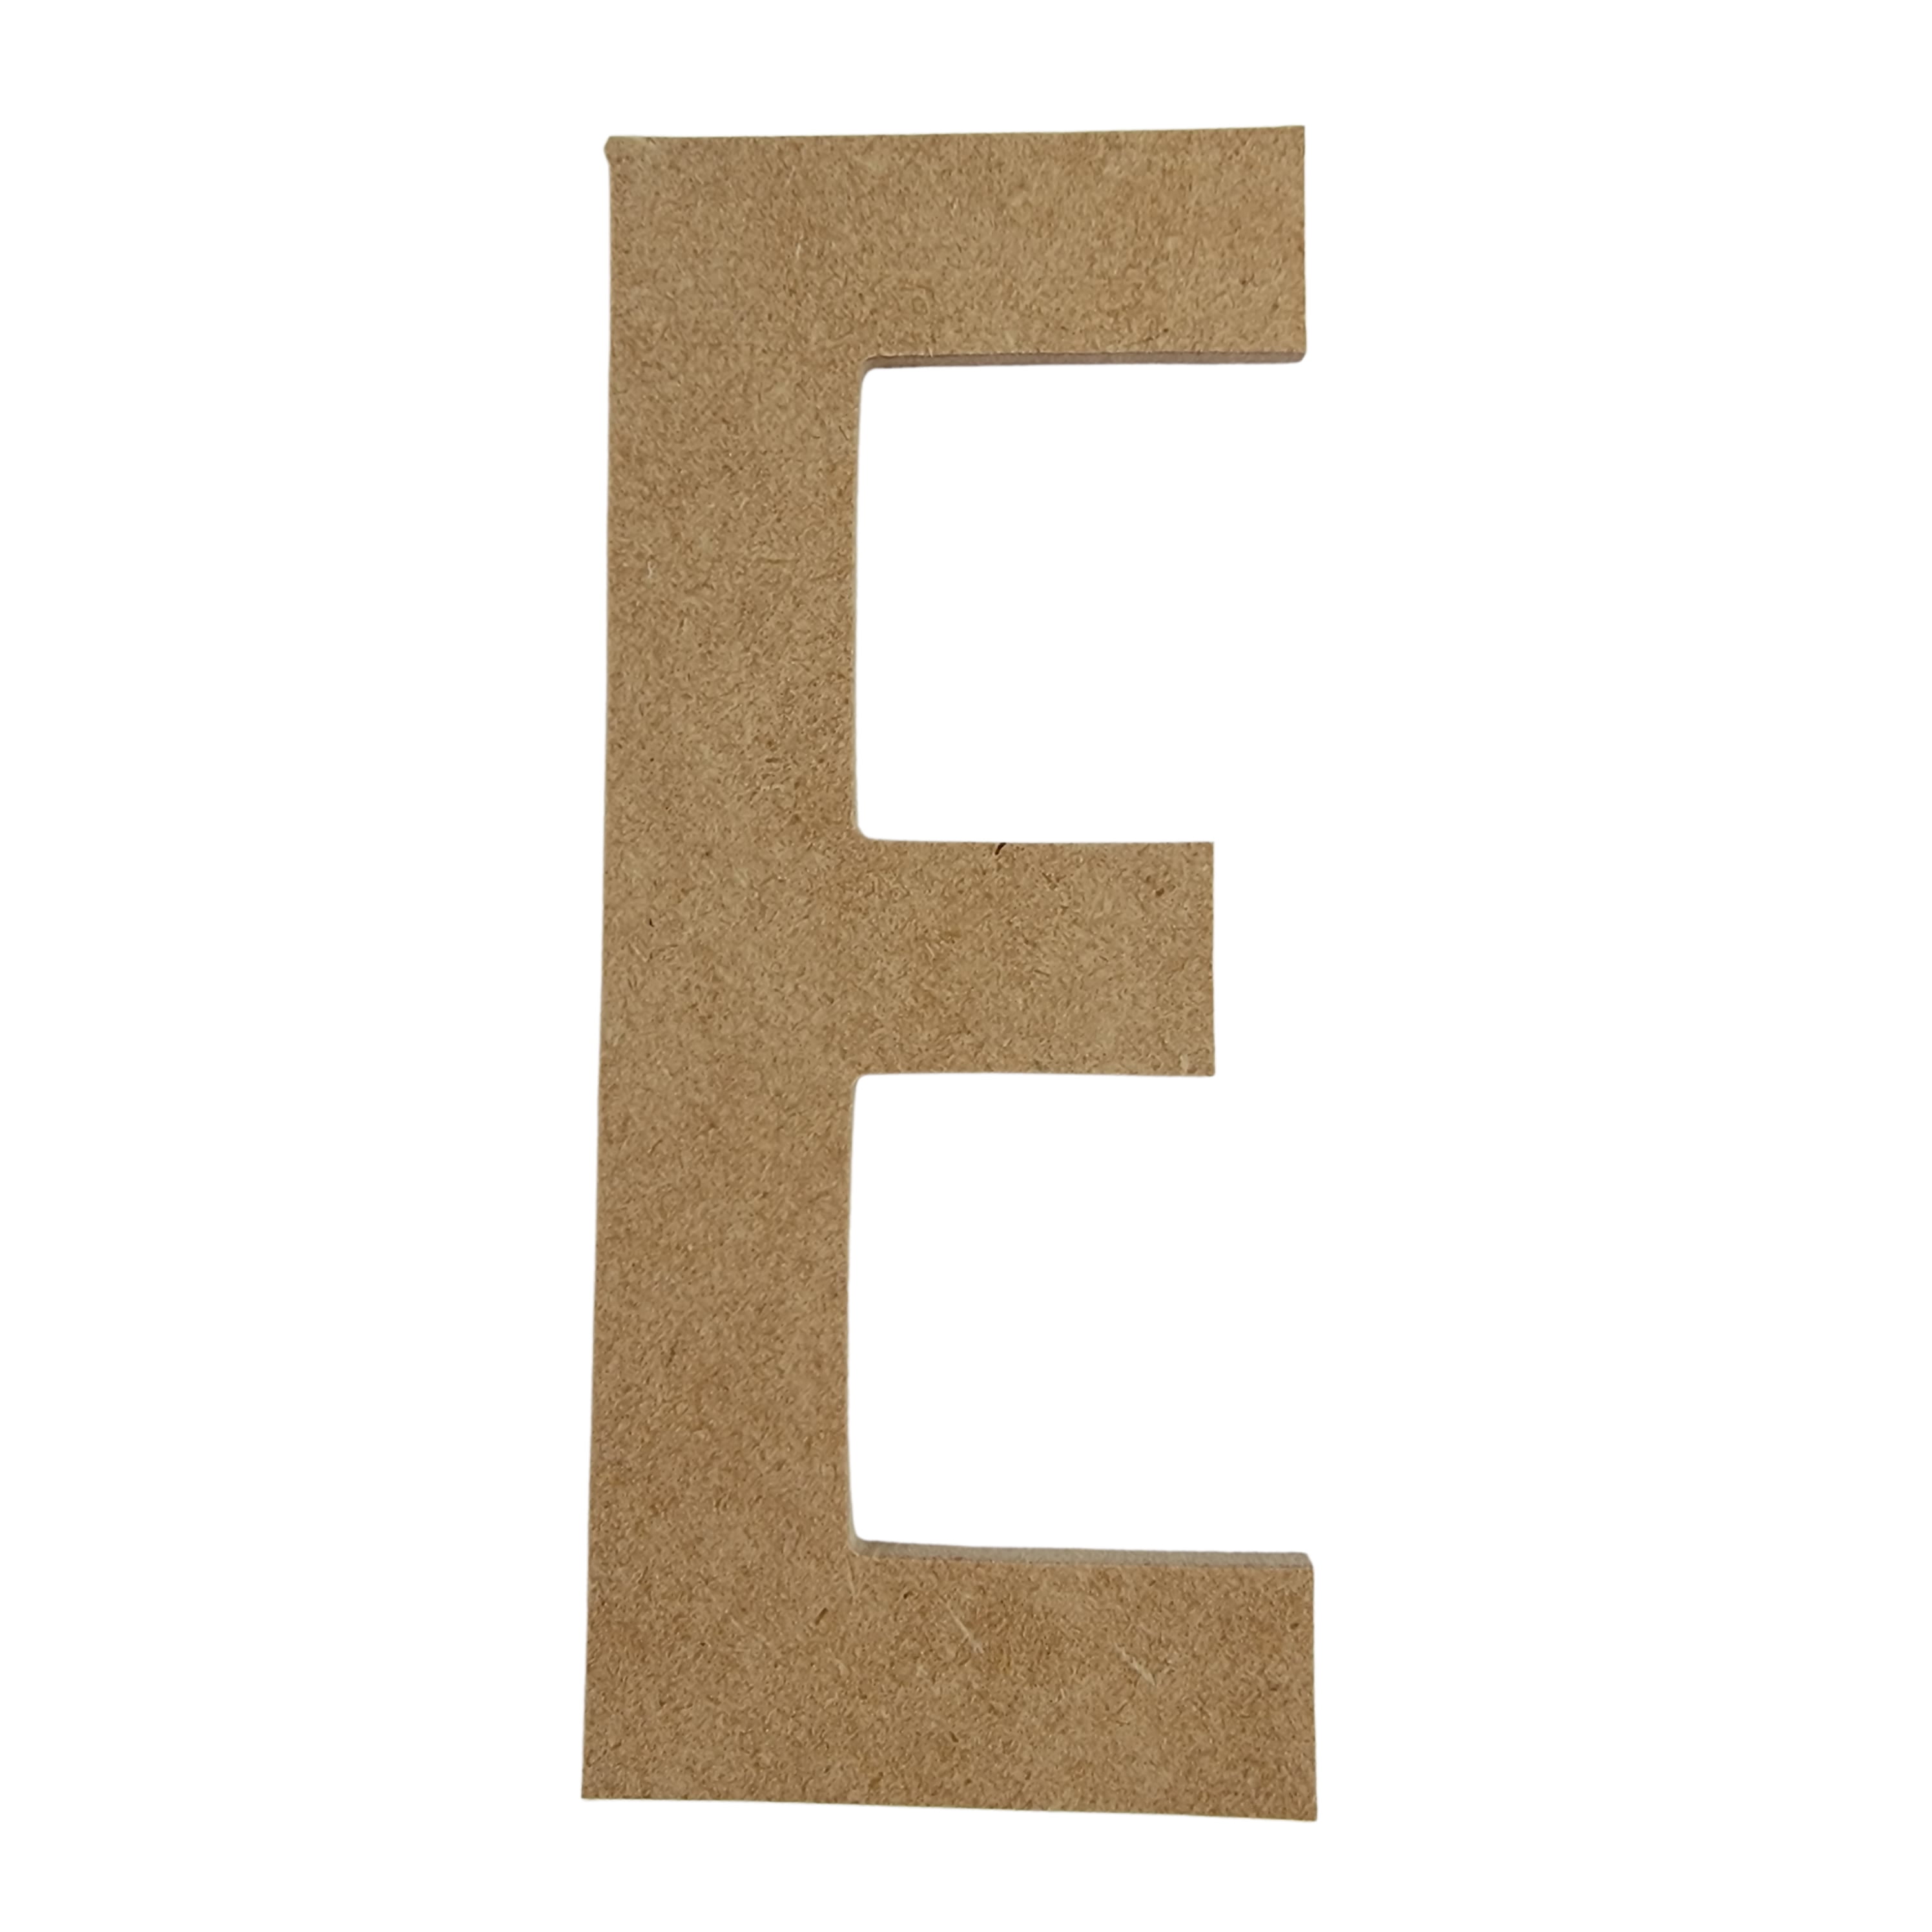 WOODEN EDUCATIONAL LETTERS 18mm Thick Freestanding A-Z Available 